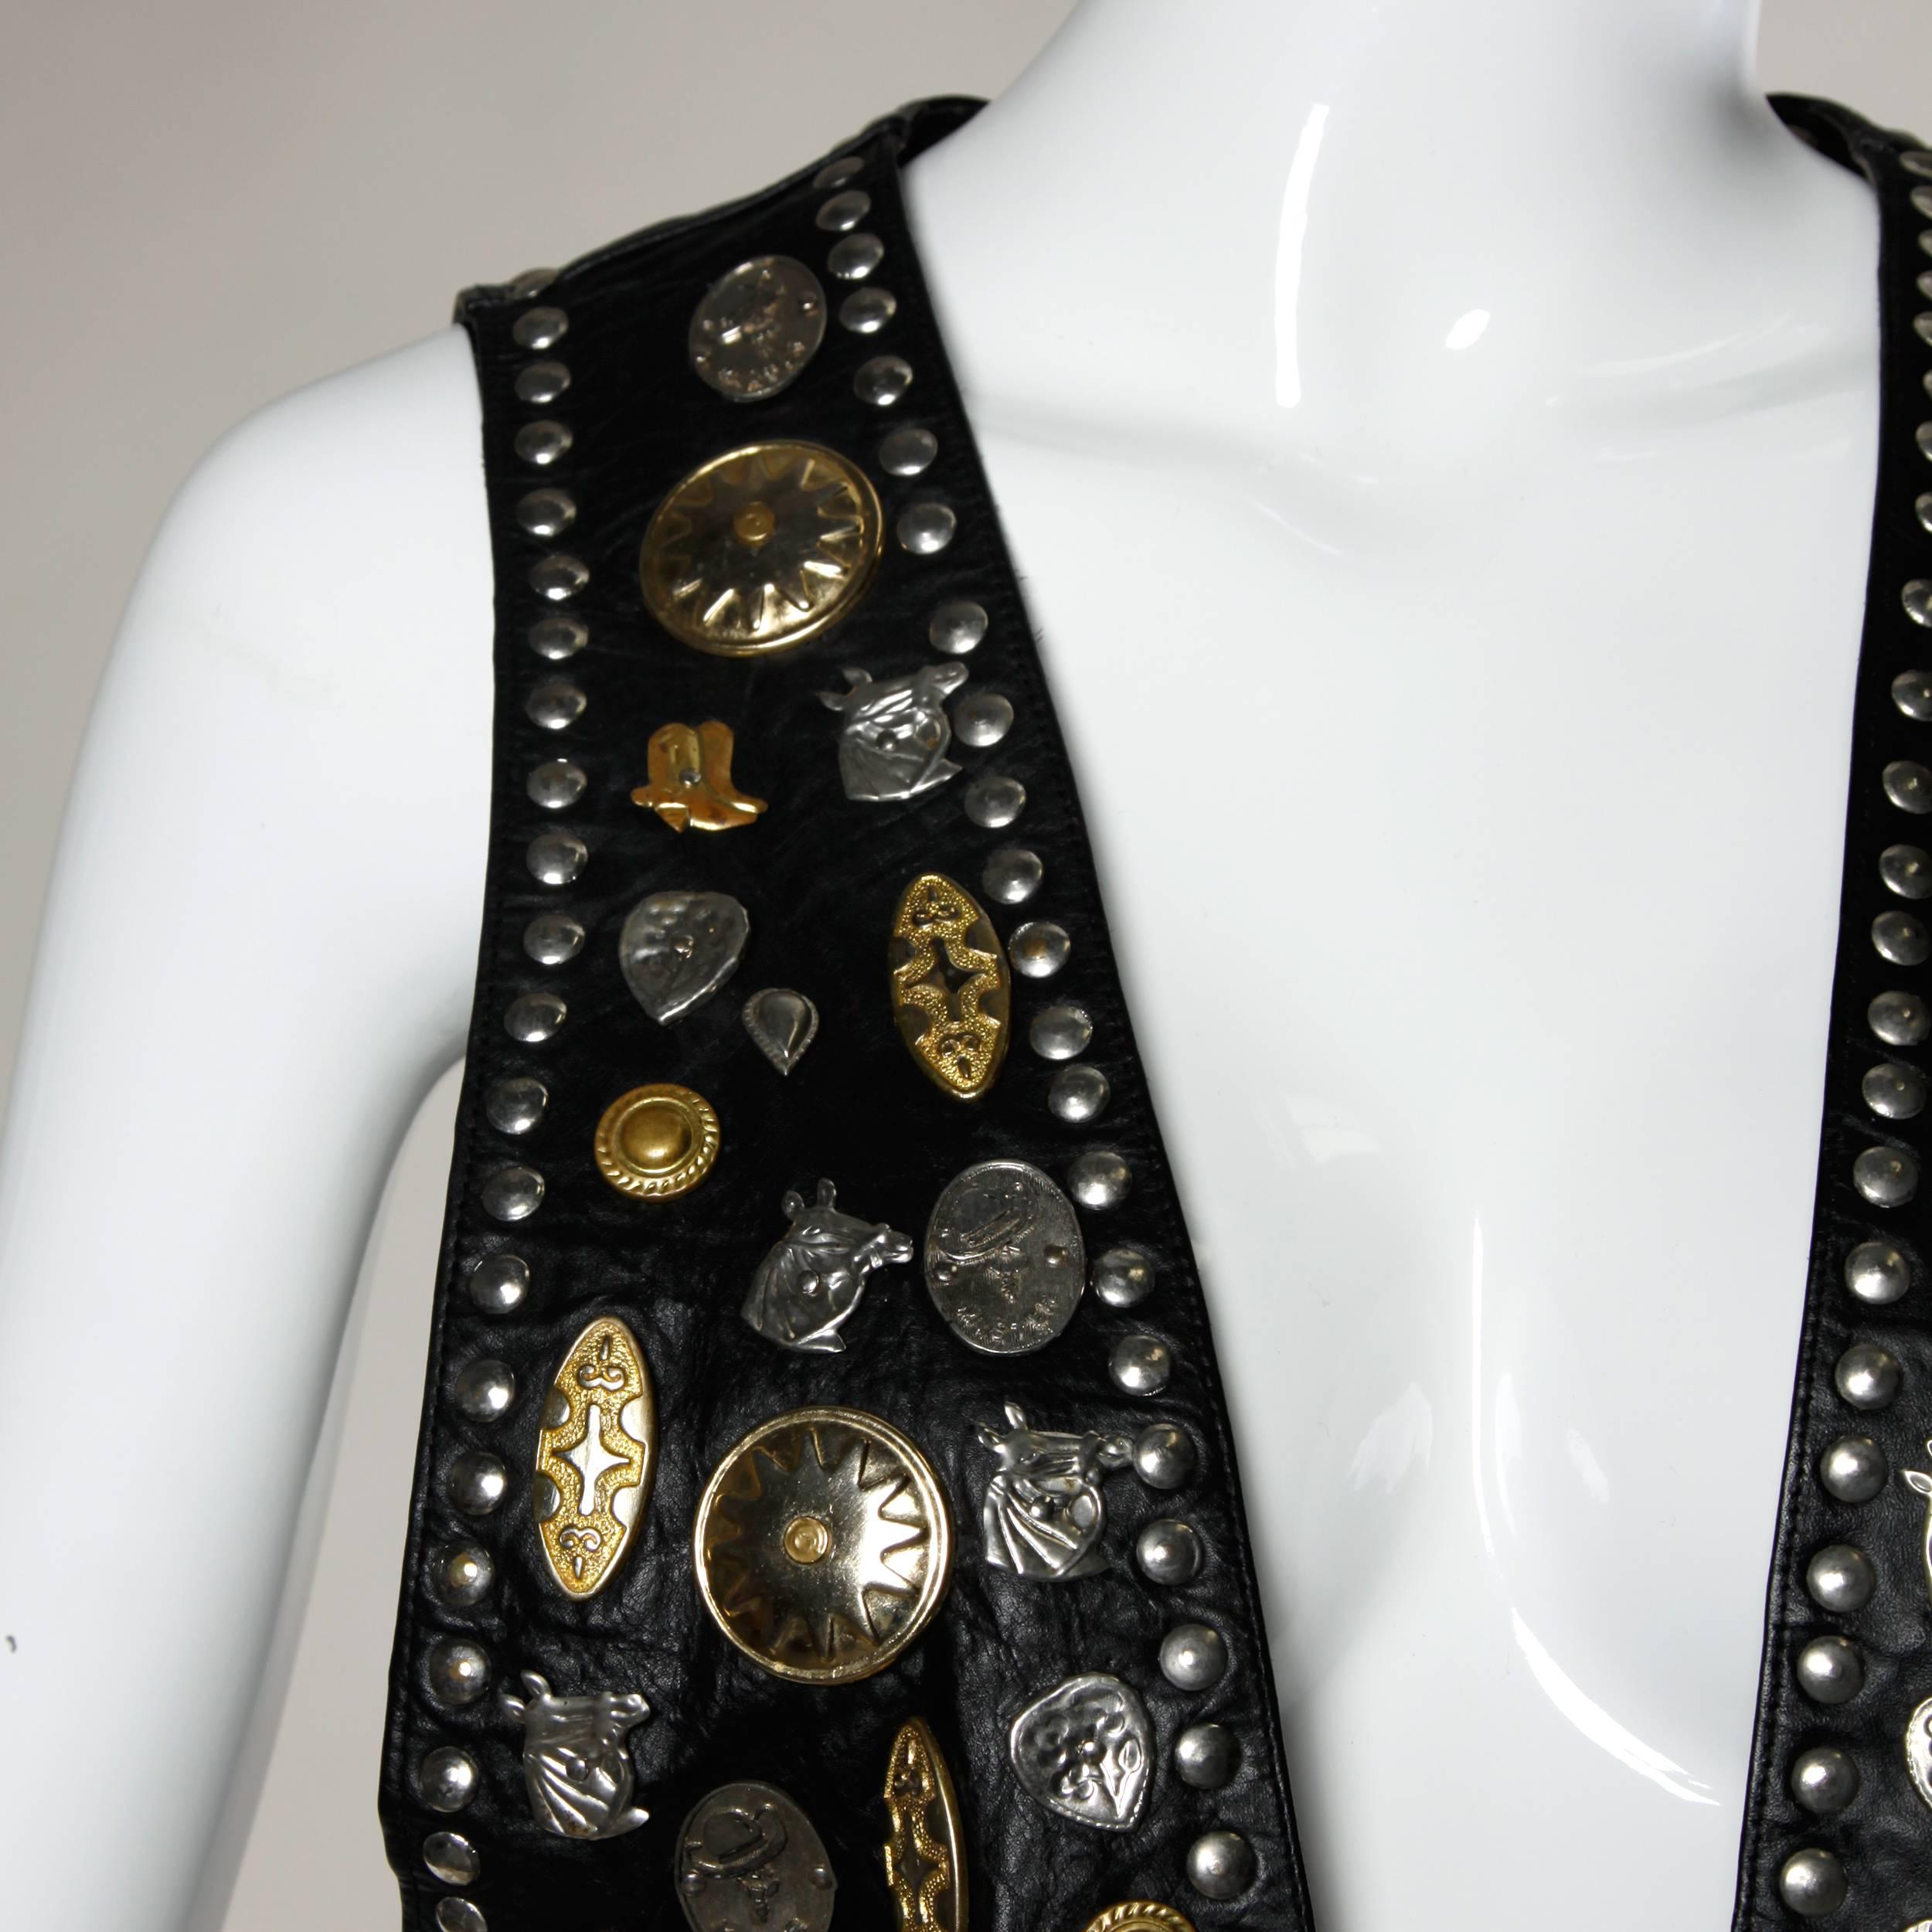 Unique vintage leather vest with oversized novelty studwork featuring horses, cowboy boots and conchos. Heavy and hand made!

Details:

Fully Lined
No Closure
Marked Size: Not Marked
Estimated Size: Free
Color: Black/ Gold and Silver